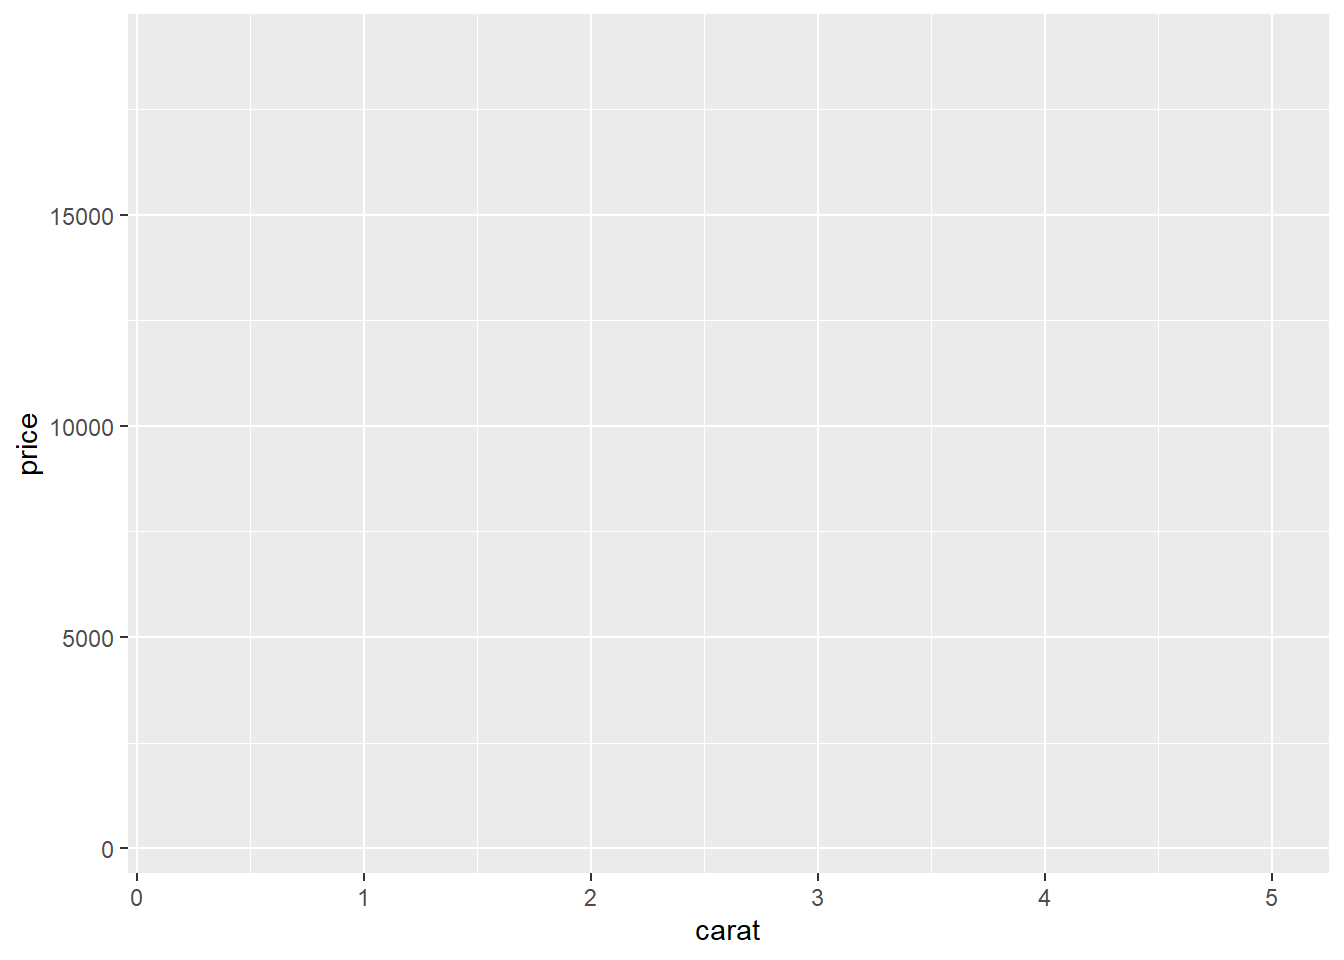 A ggplot object with no geom layers